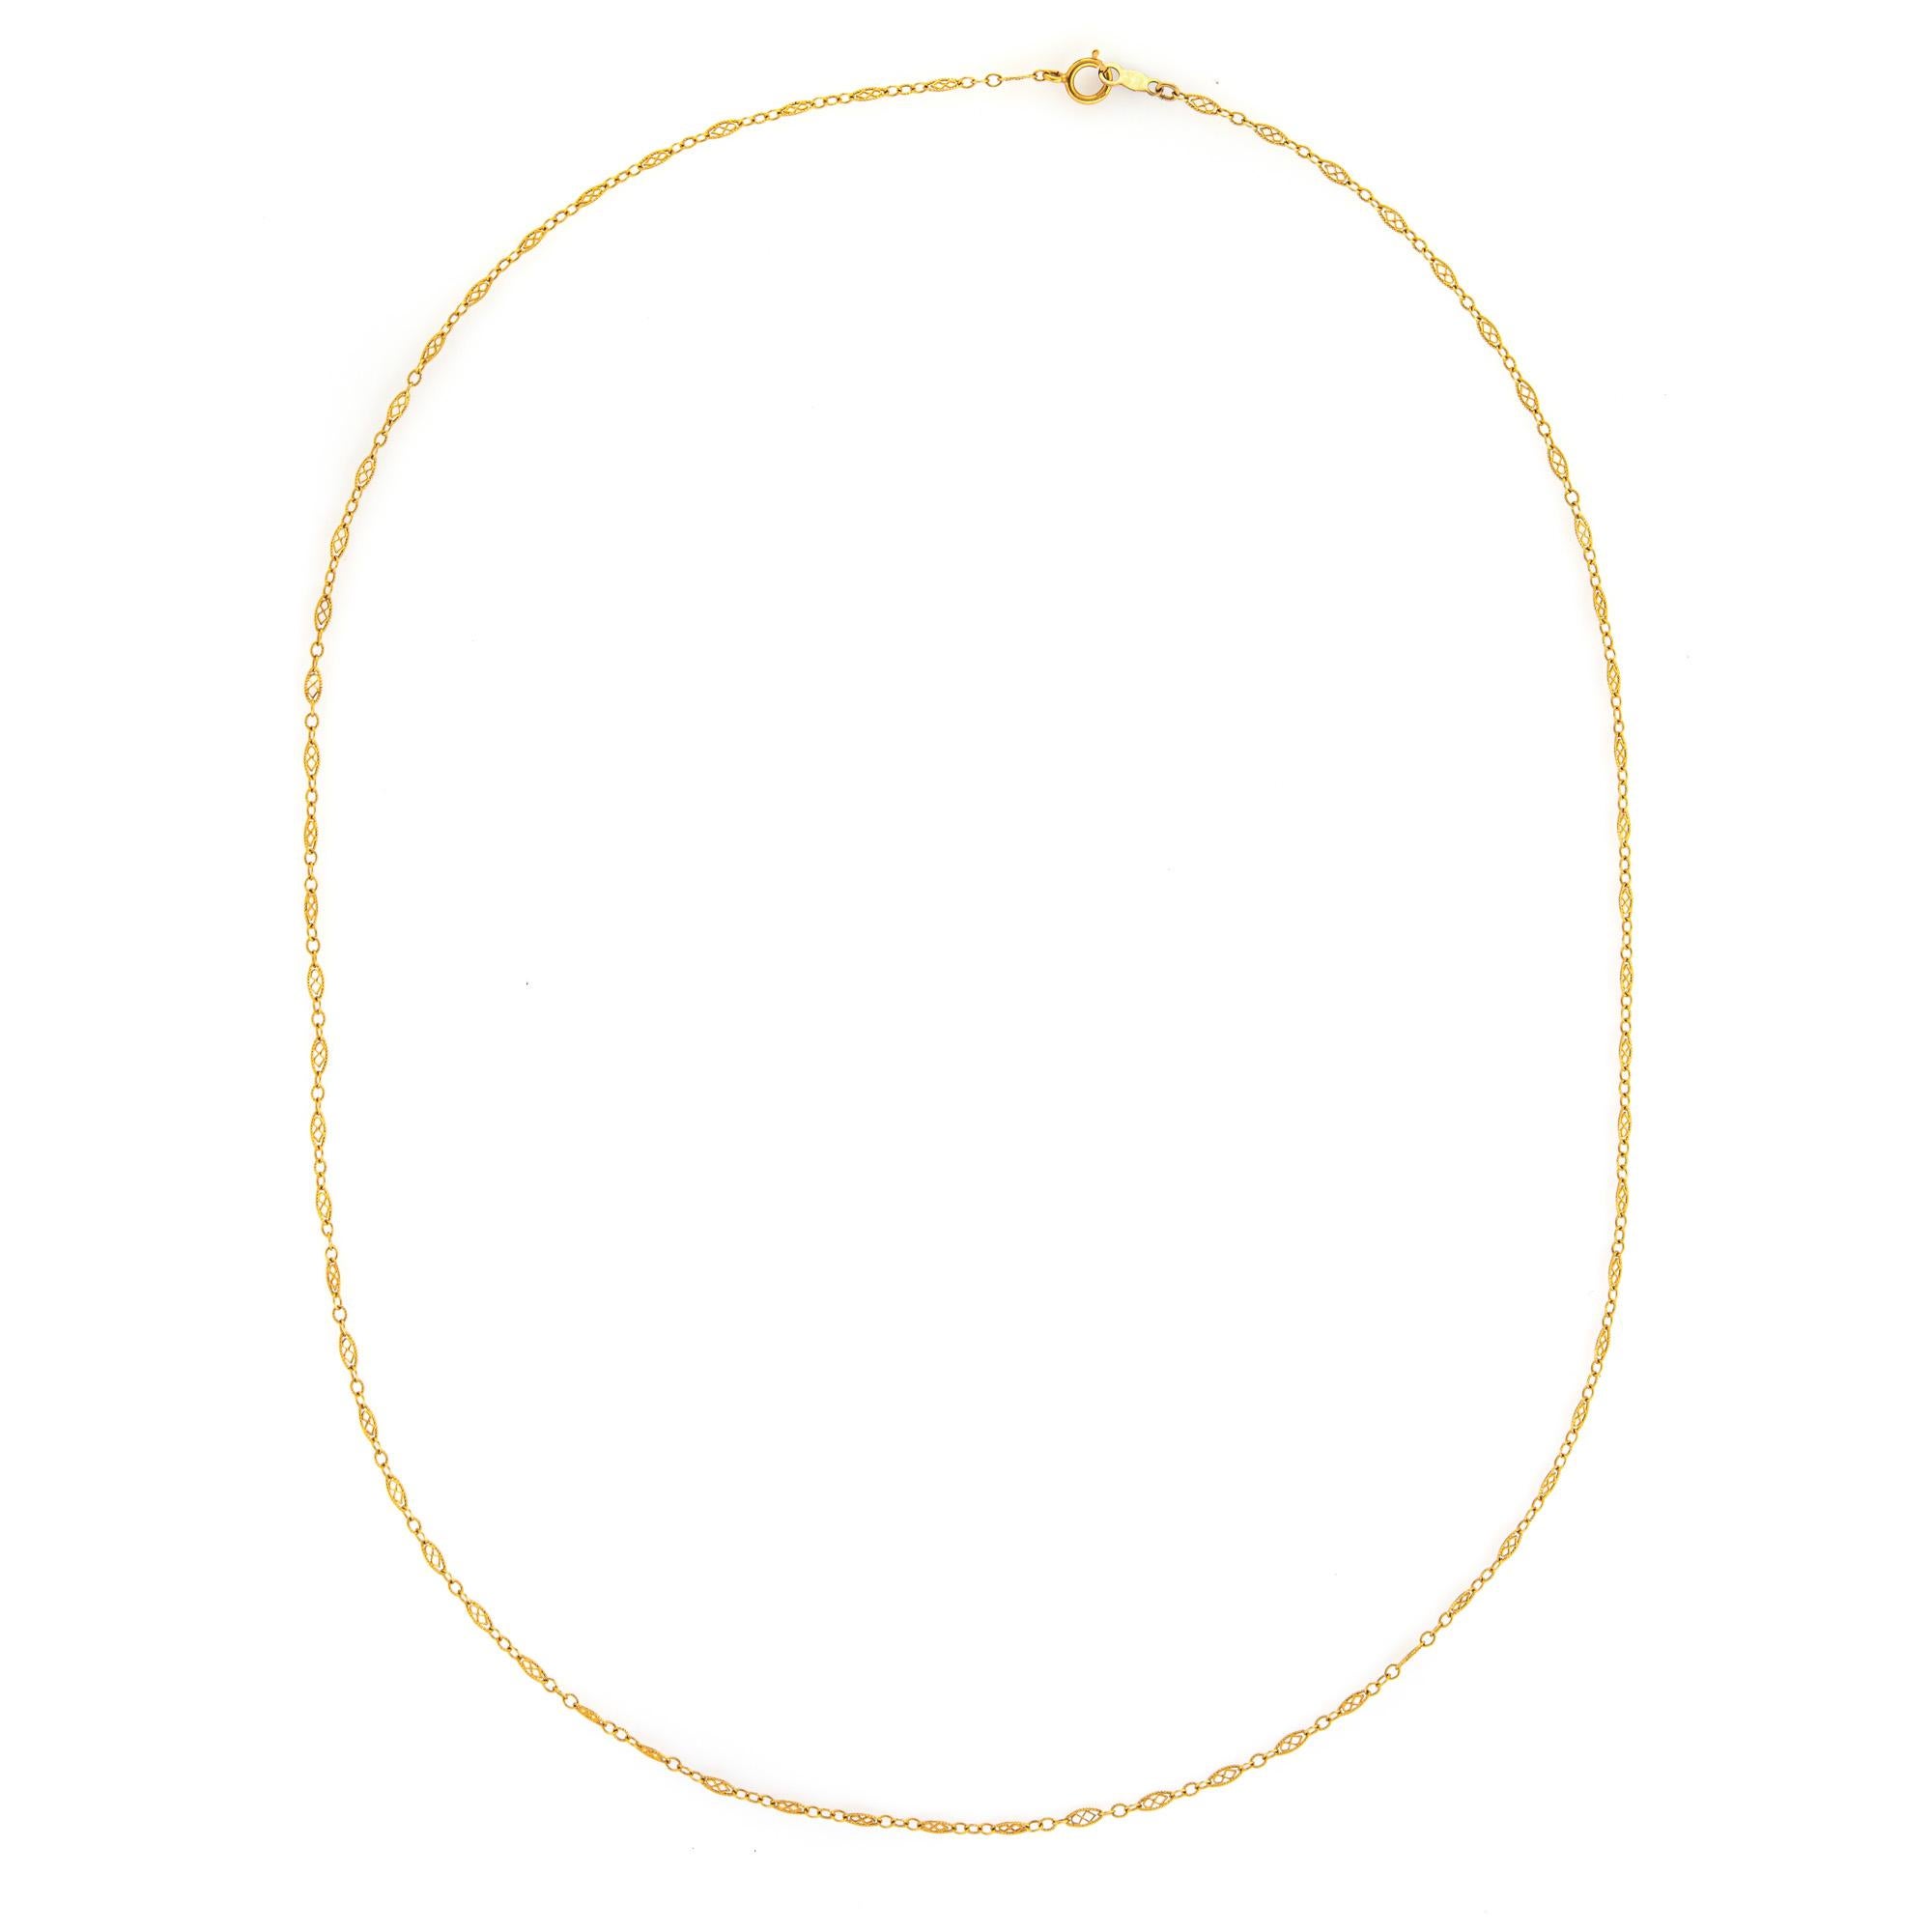 Stylish and finely detailed vintage necklace crafted in 14 karat yellow gold (circa 1940s to 1950s).  

The necklace features oval links with intricate fine detail to the center. The oval links are 2mm wide with the necklace offering a delicate